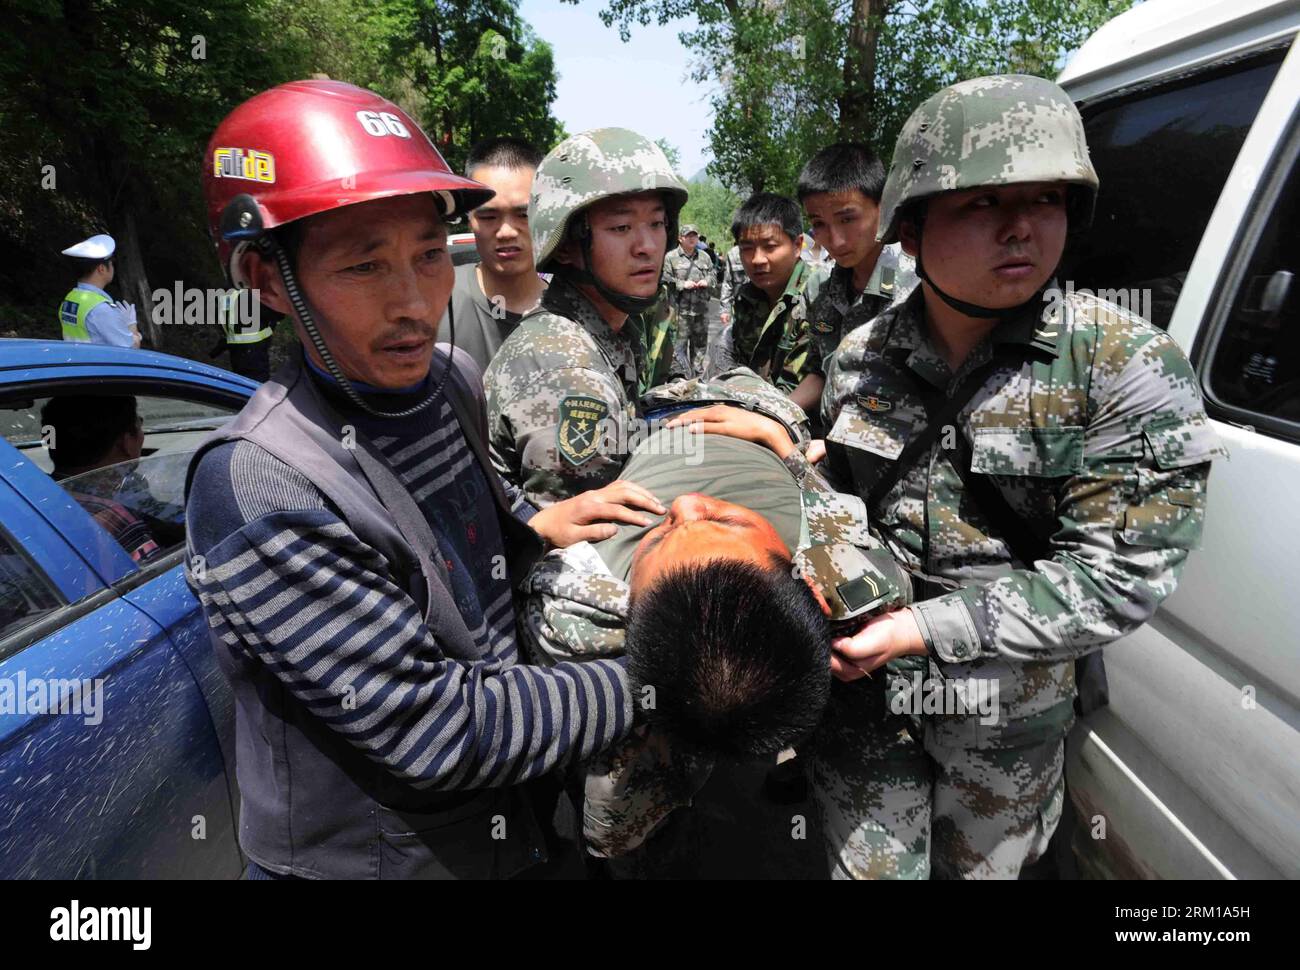 Bildnummer: 59544775  Datum: 20.04.2013  Copyright: imago/Xinhua (130420) -- YA AN, April 20, 2013 (Xinhua) -- Rescuers carry out a soldier saved from a rescue car from Chengdu Military Region which falls off a cliff into a river in southwest China s Sichuan Province, April 20, 2013. Two of the 17 soldiers in the car have died by 11:30 p.m. Saturday Beijing Time. A total of 156 have been killed in the 7.0-magnitude earthquake in Sichuan s Lushan as of 8:50 p.m. Saturday, according to the China Earthquake Administration. (Xinhua)(wjq) CHINA-SICHUAN-EARTHQUAKE-RESCUE-ACCIDENT (CN) PUBLICATIONxNO Stock Photo